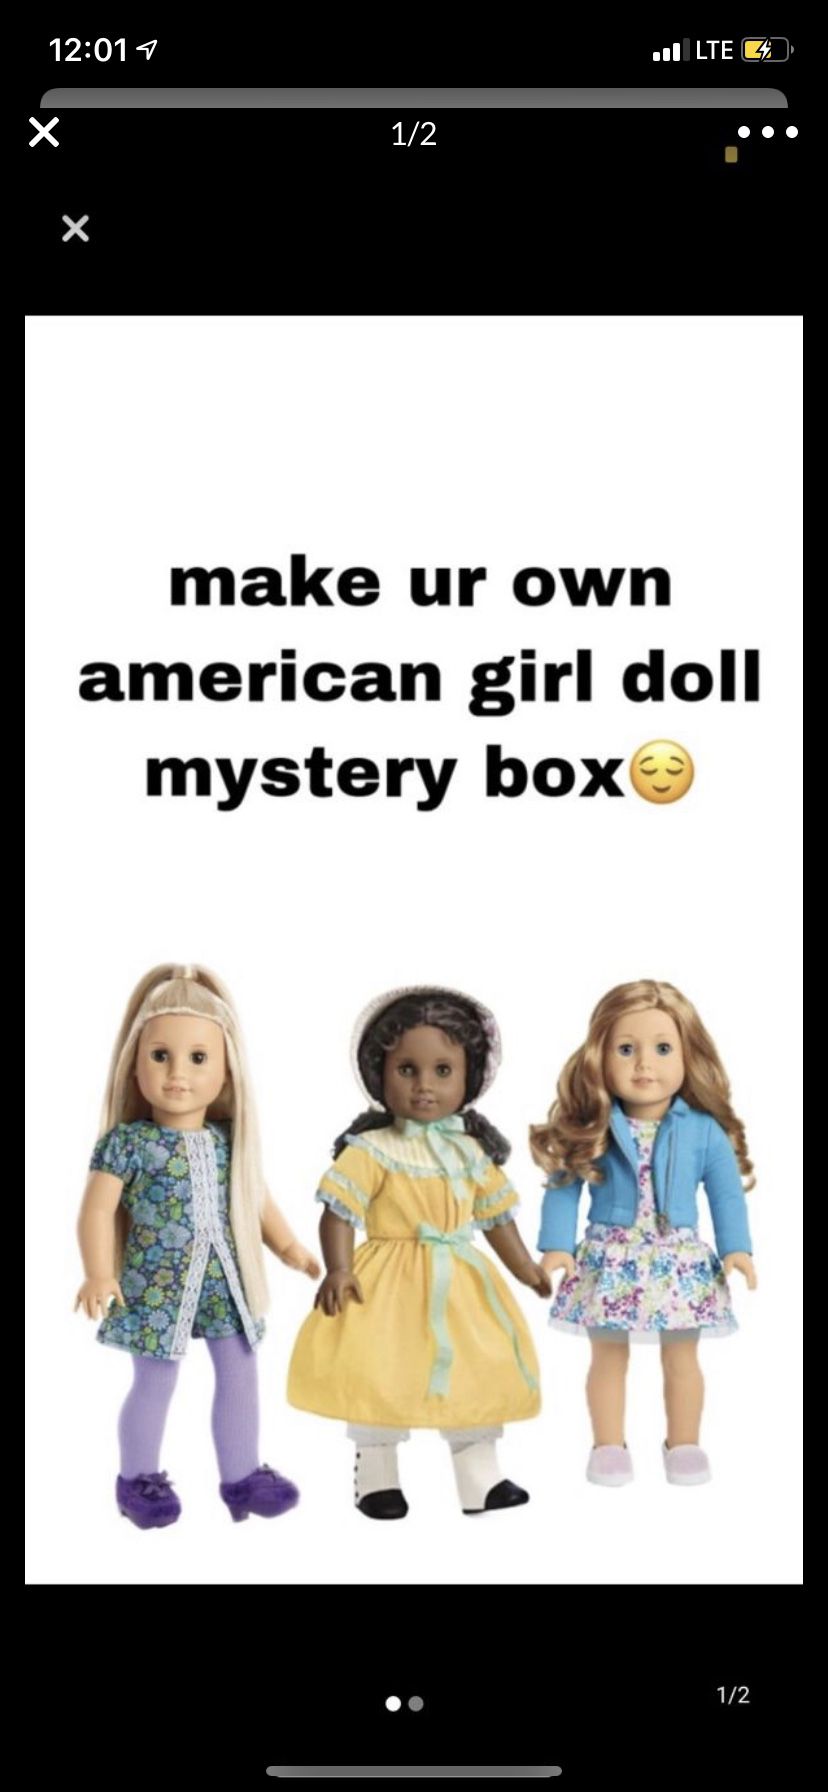 make your own American girl doll mystery box!